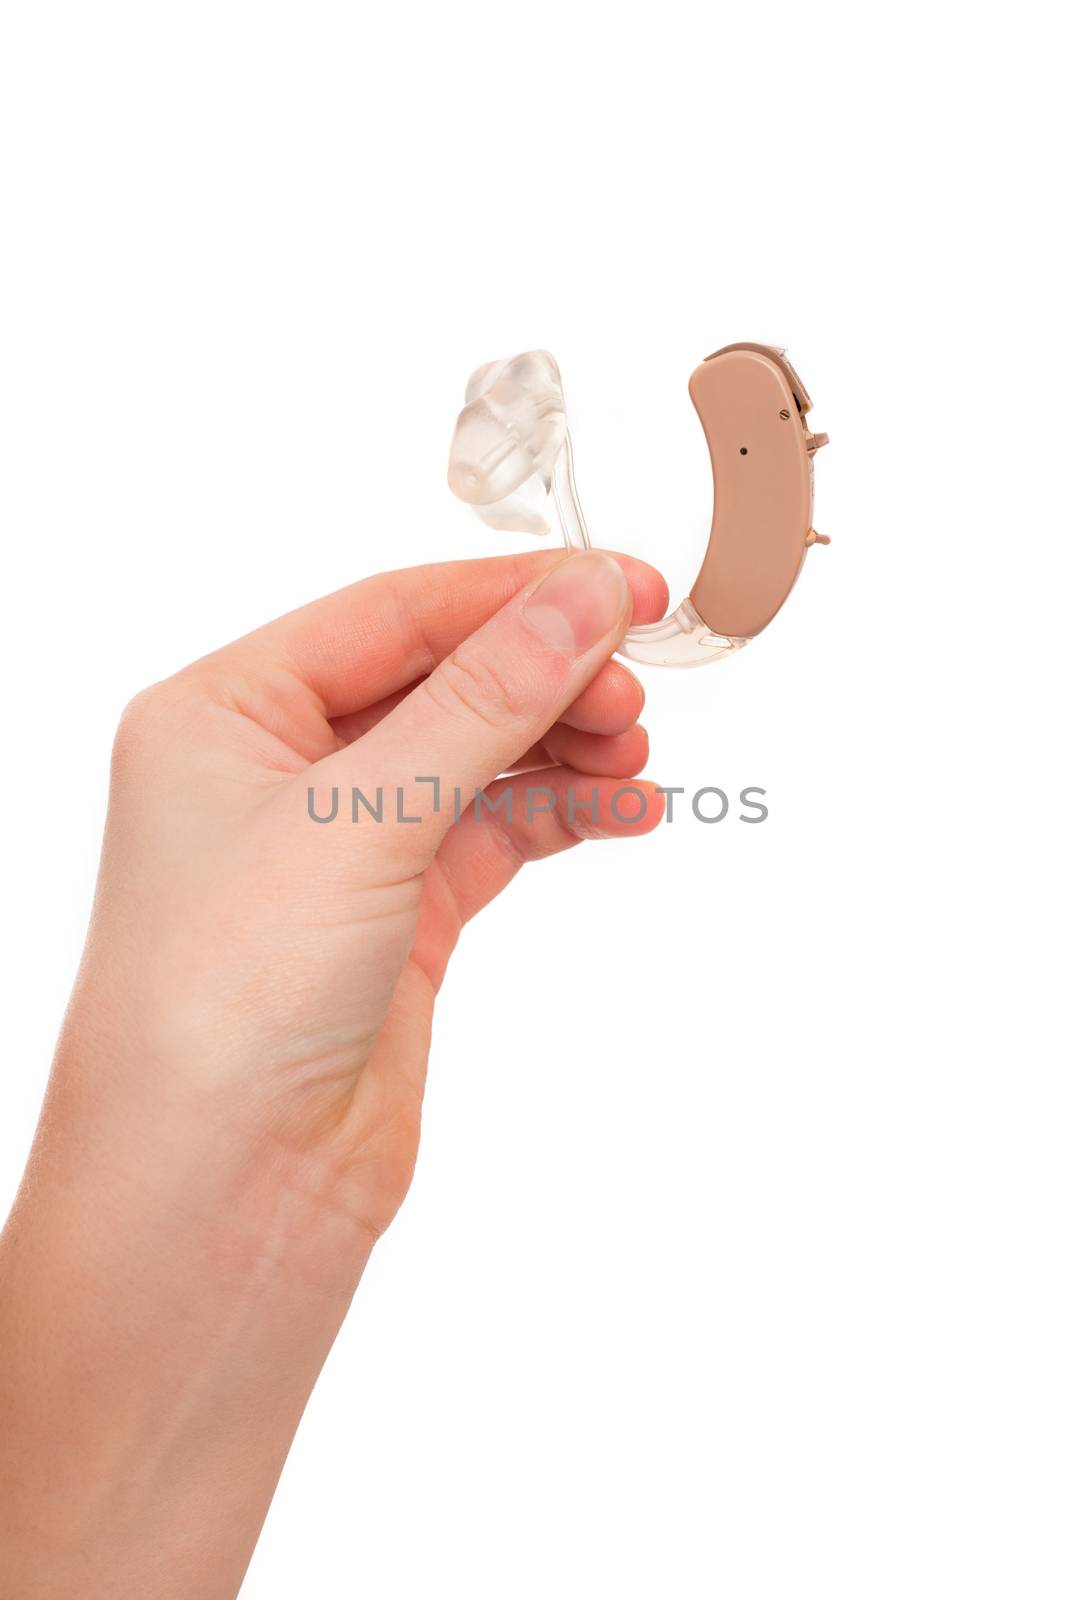 Young female's hand holding a hearing aid between fingers. Isolated on white